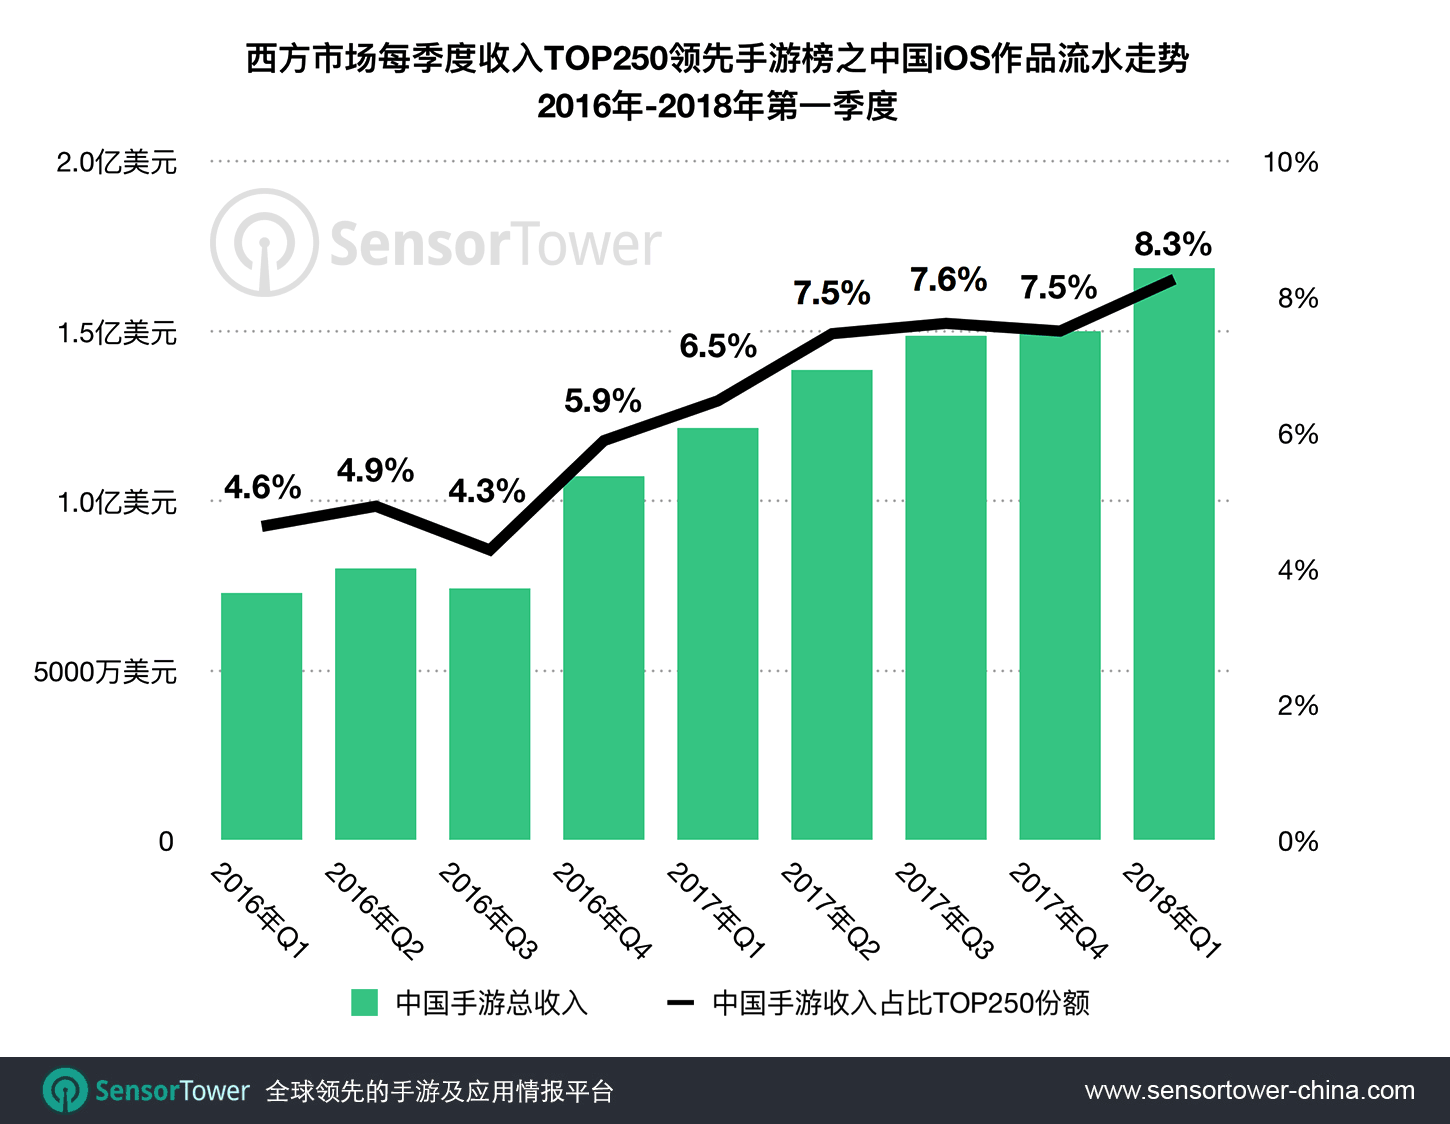 Revenue for Chinese-Made iOS Games within Western Markets' Quarterly Top 250 Grossing Titles